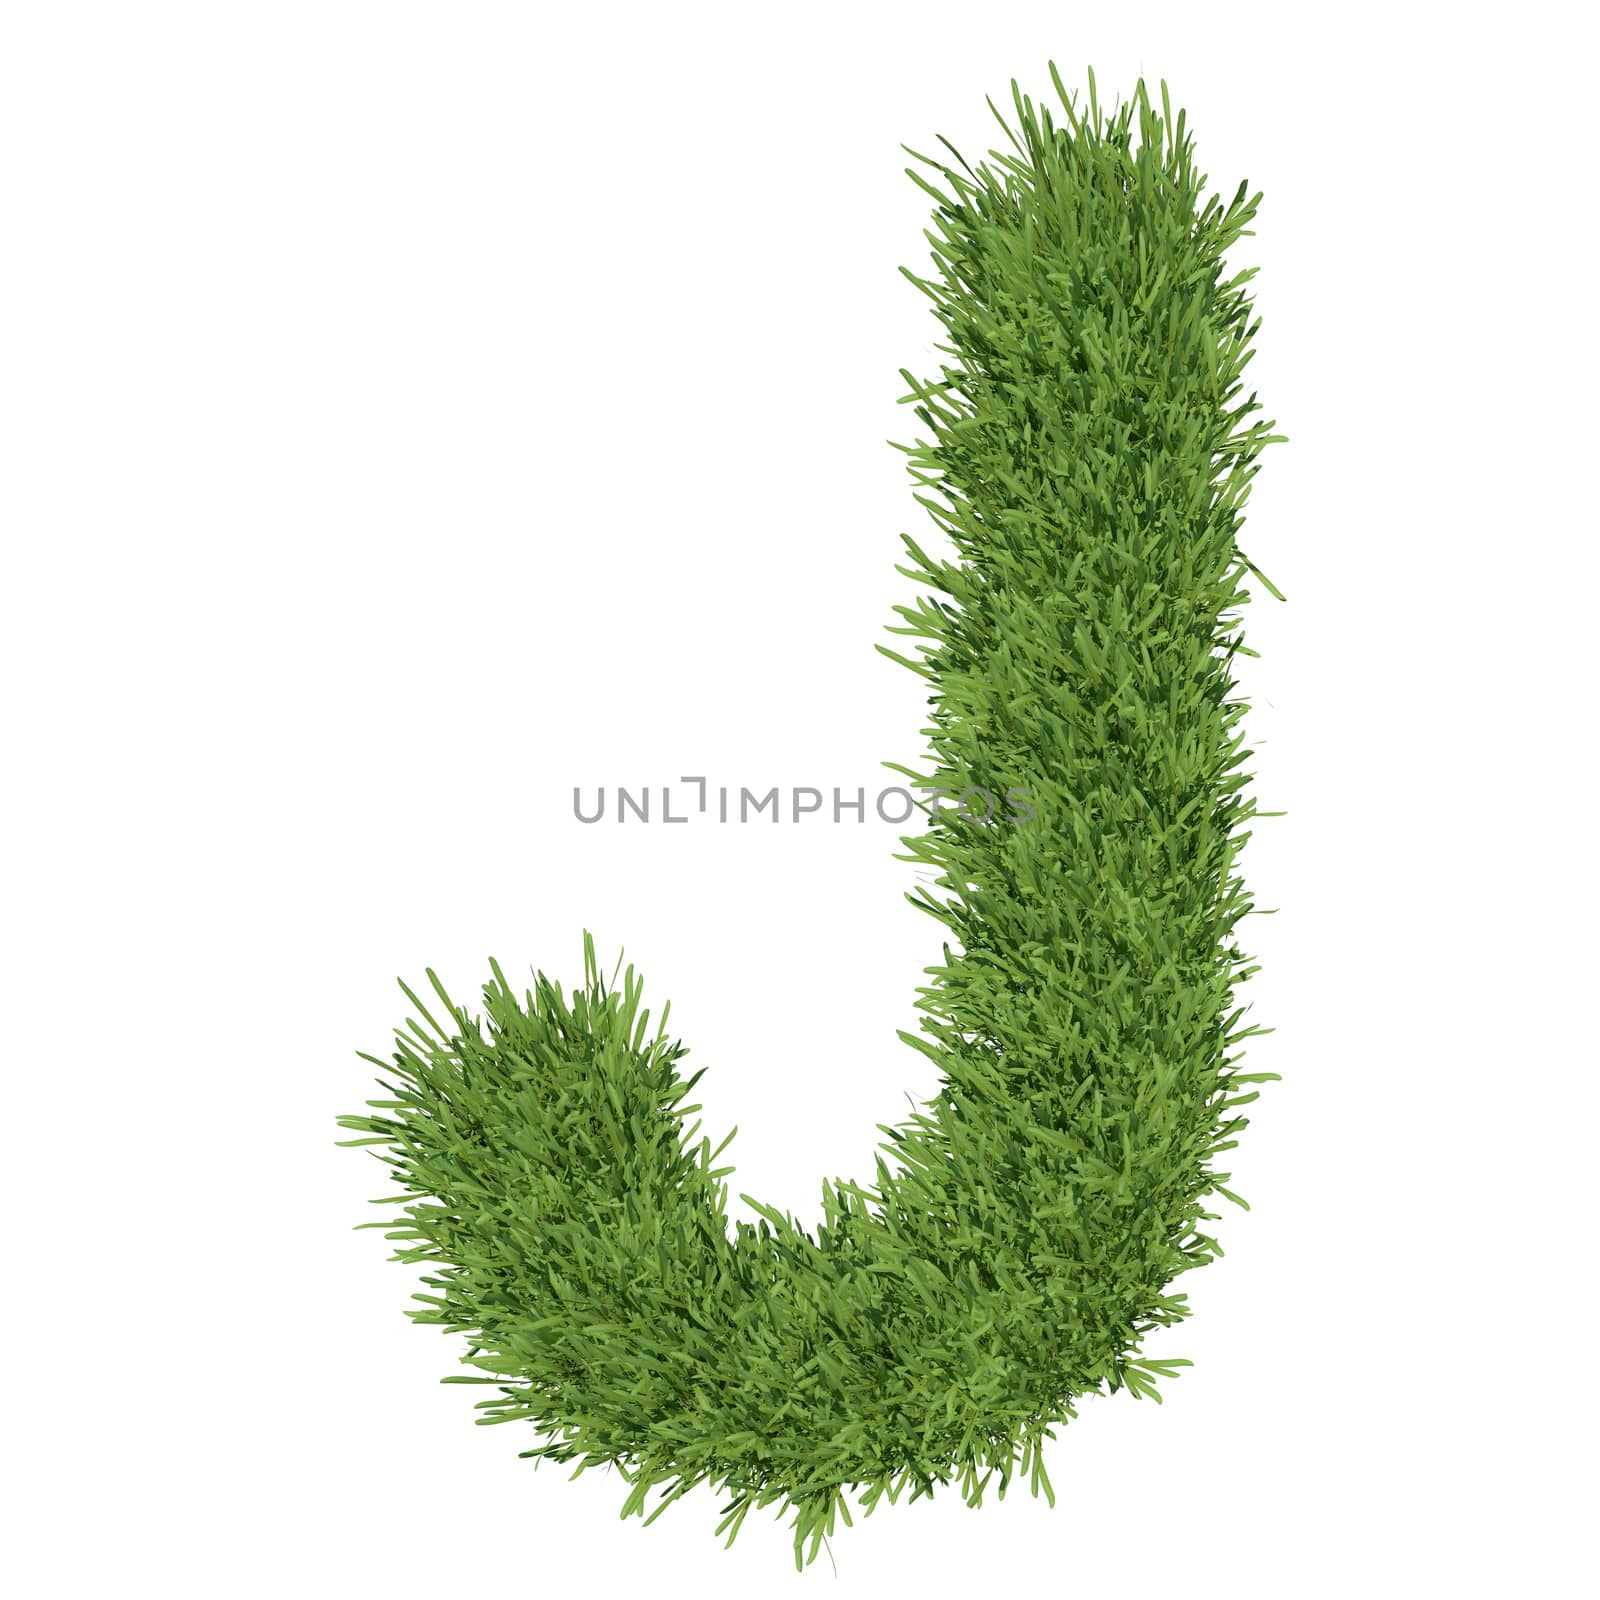 Letter of the alphabet made from grass. Isolated render on a white background